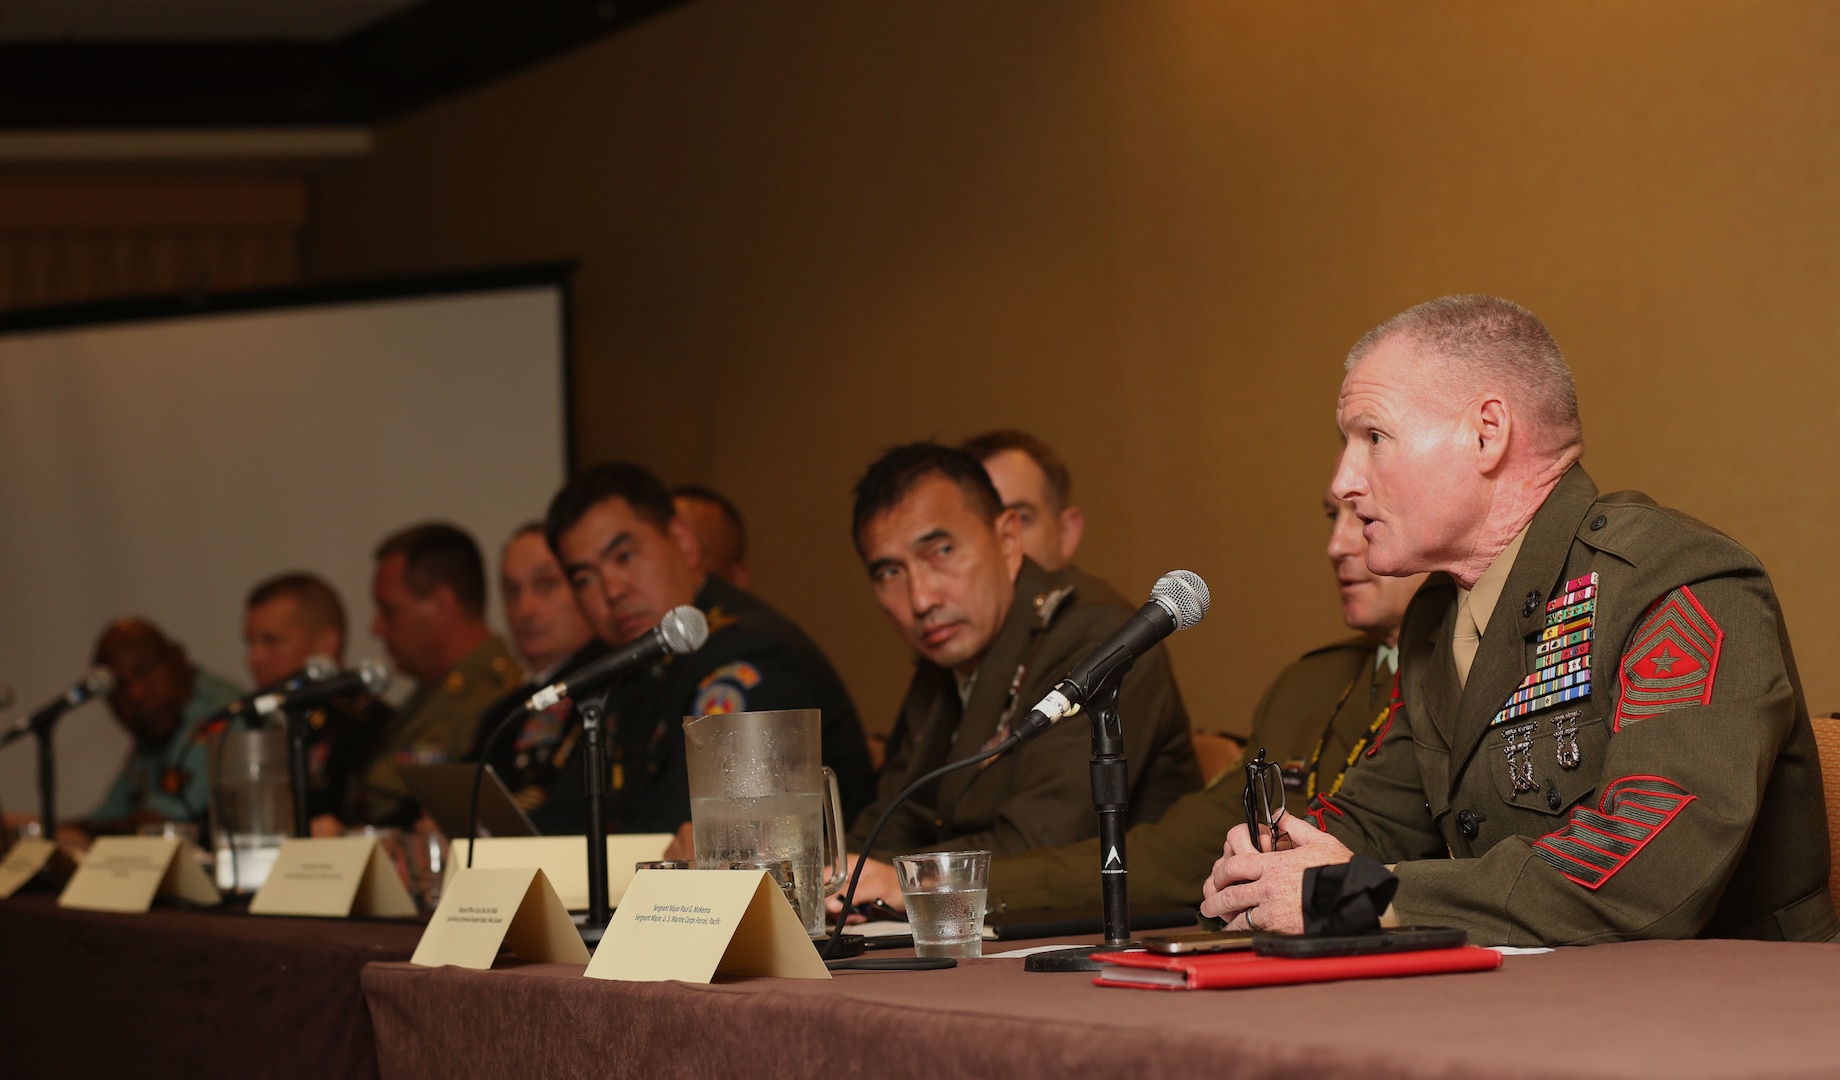 U.S. Marine Sgt. Maj. Paul G. McKenna provides a Marine’s point of view during the Land Power in the Pacific Symposium and Exposition in Honolulu, Hawaii, May 24, 2016.